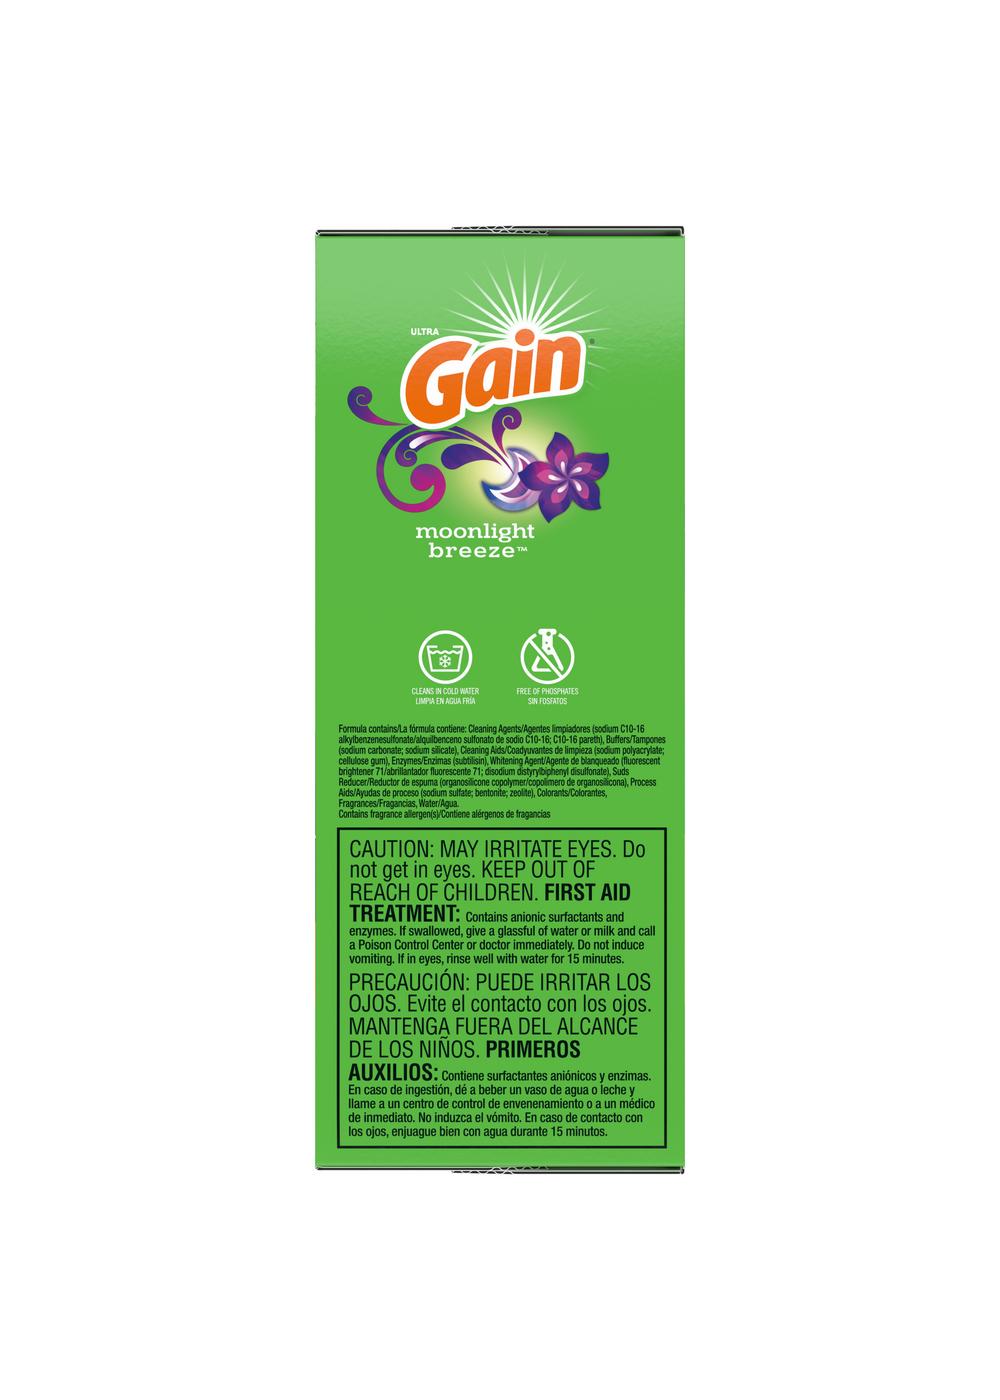 Gain Aroma Boost HE Powder Laundry Detergent, 69 Loads - Moonlight Breeze; image 2 of 4